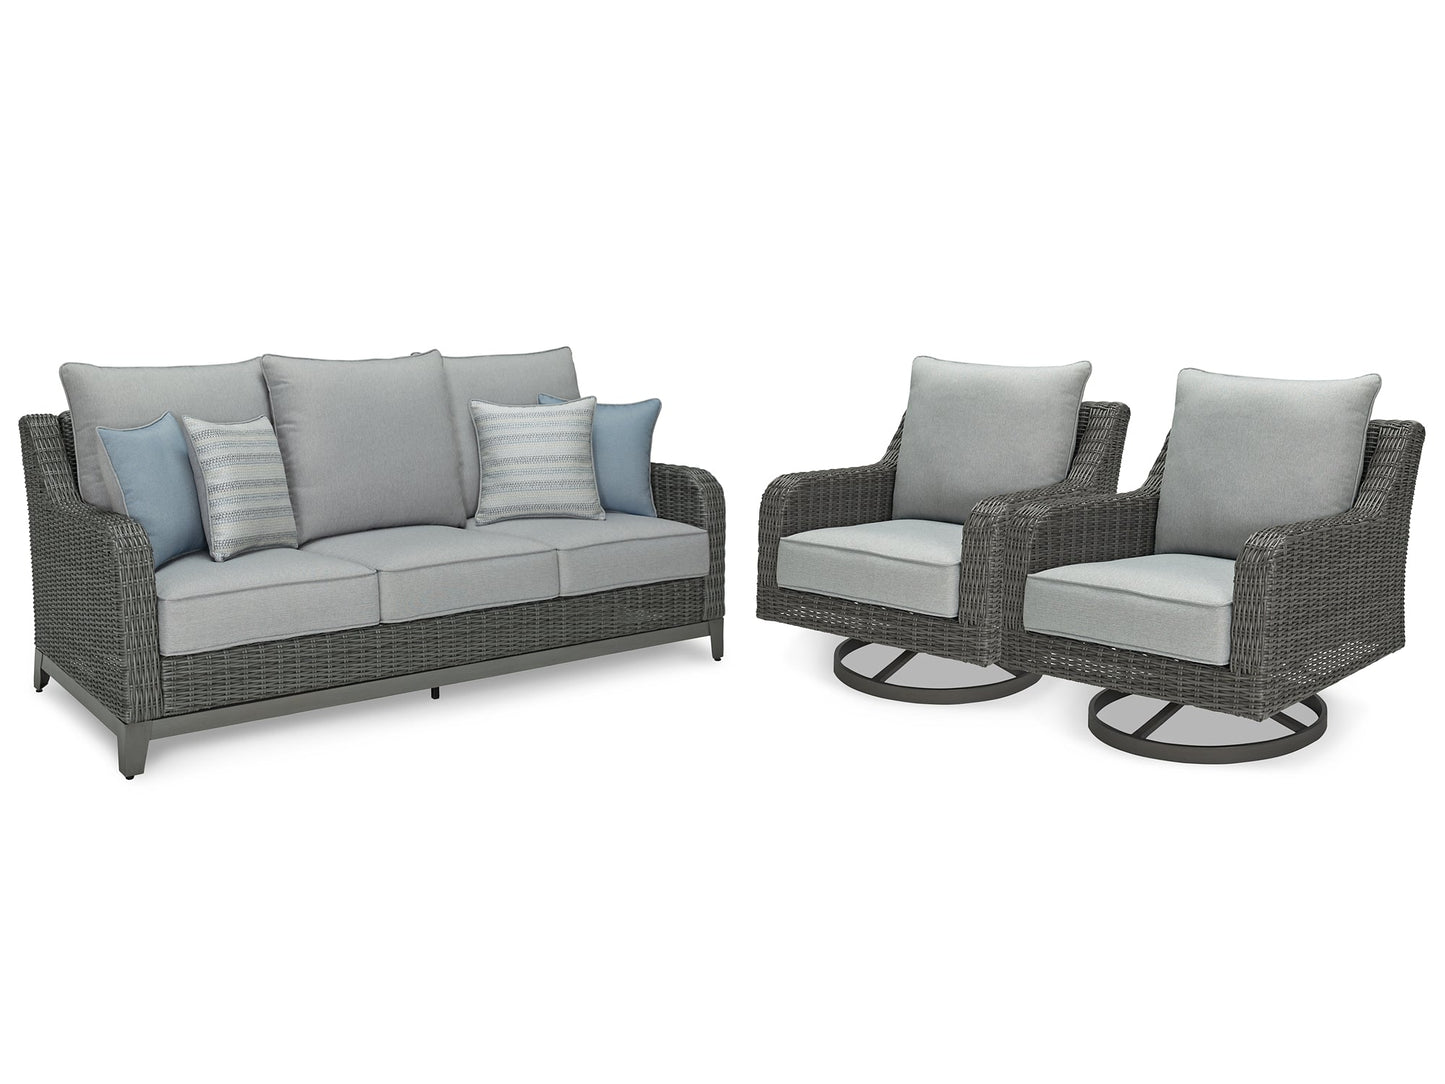 Elite Park Outdoor Sofa with 2 Lounge Chairs Rent Wise Rent To Own Jacksonville, Florida